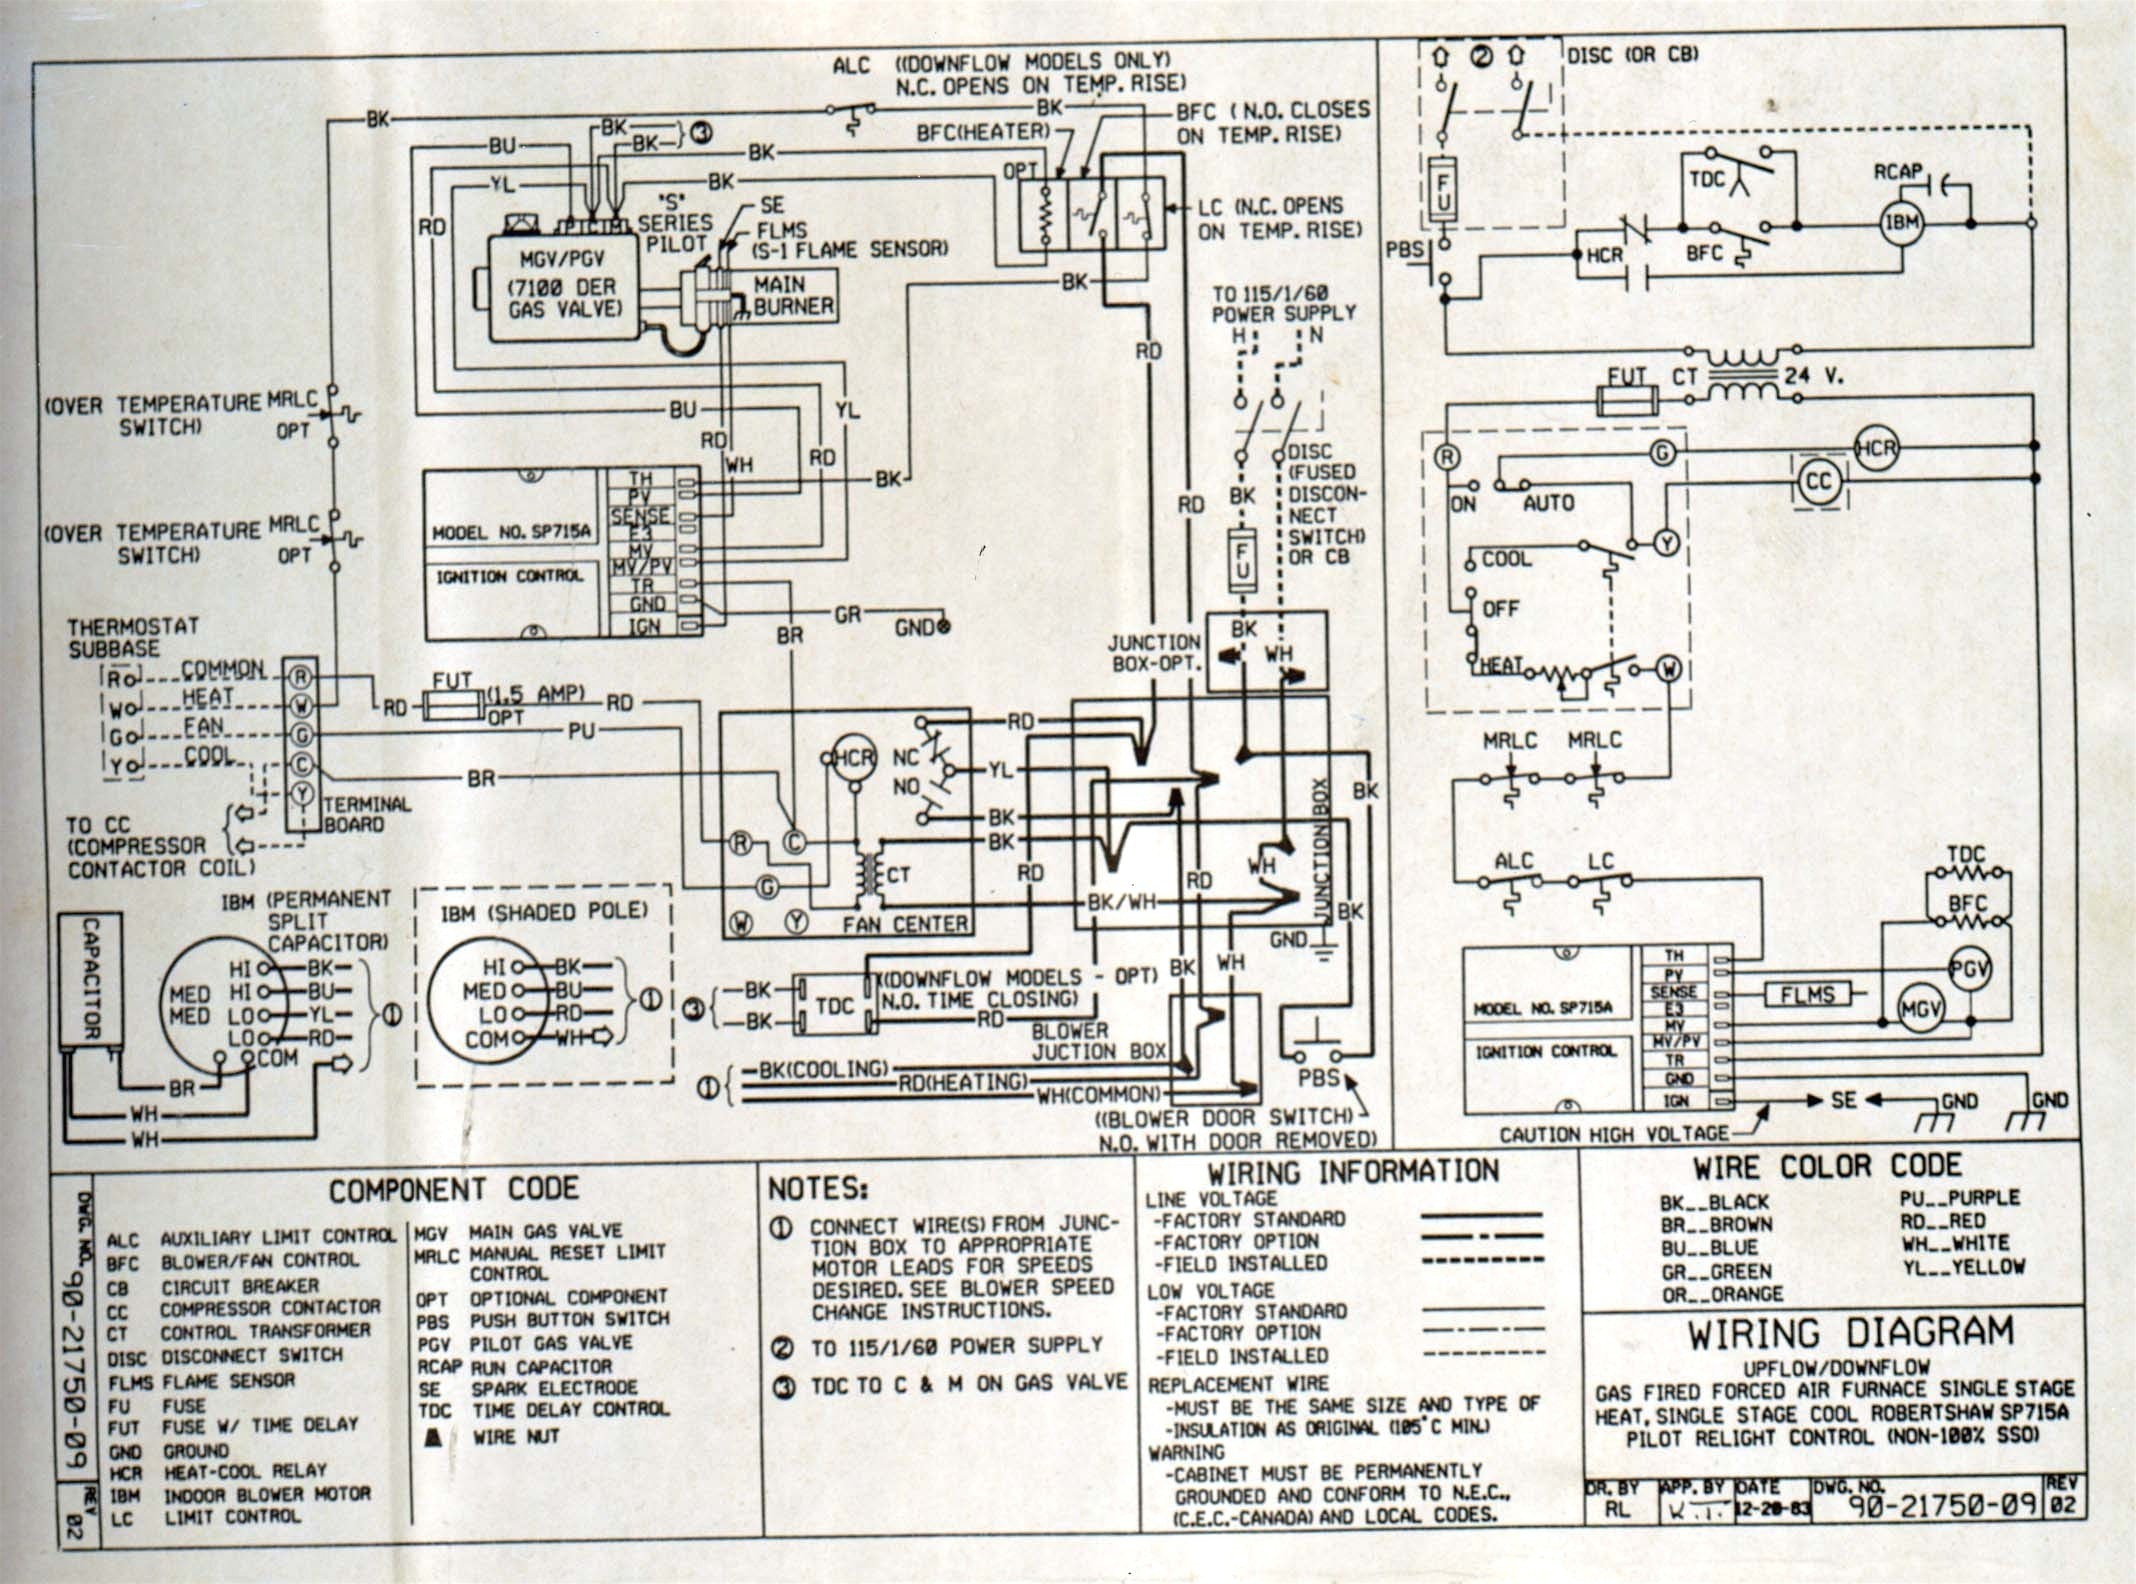 Gas Fireplace thermostat Wiring Diagram Valid Gas Pack Furnace Wiring Diagram Plete Wiring Diagrams •